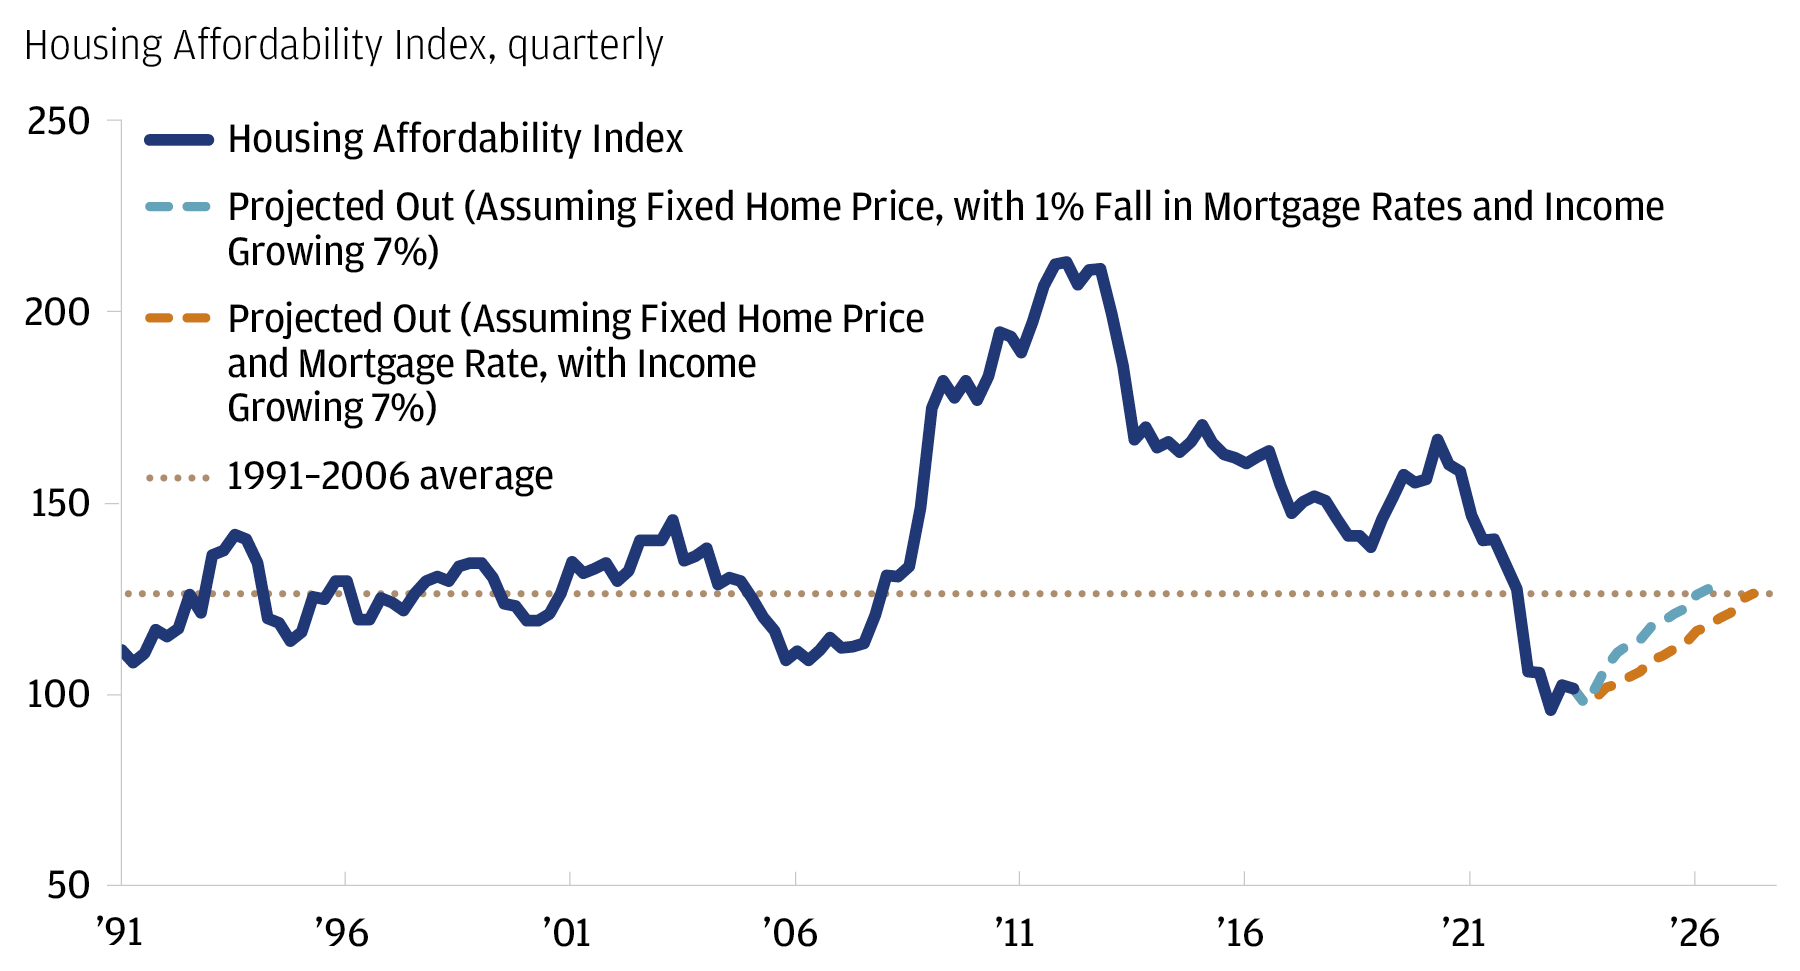 The line graph shows our proprietary Housing Affordability Index.